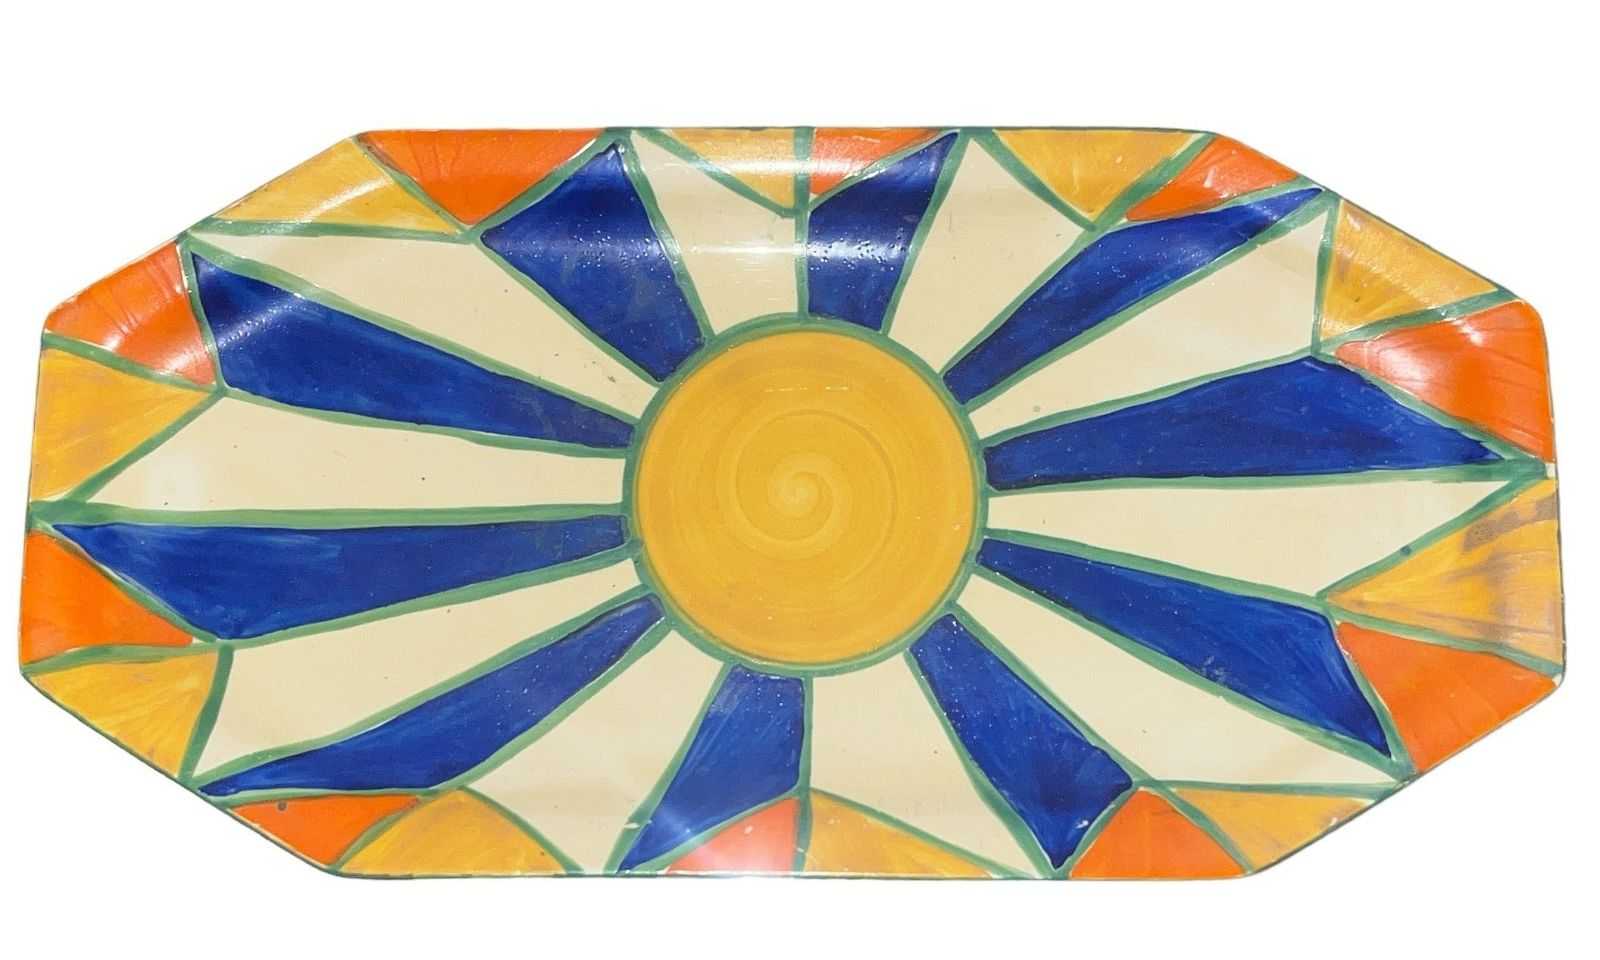 Clarice Cliff Bizarre ware pottery dish with a sunburst pattern, estimated at $200-$400 at Rivich Auction.